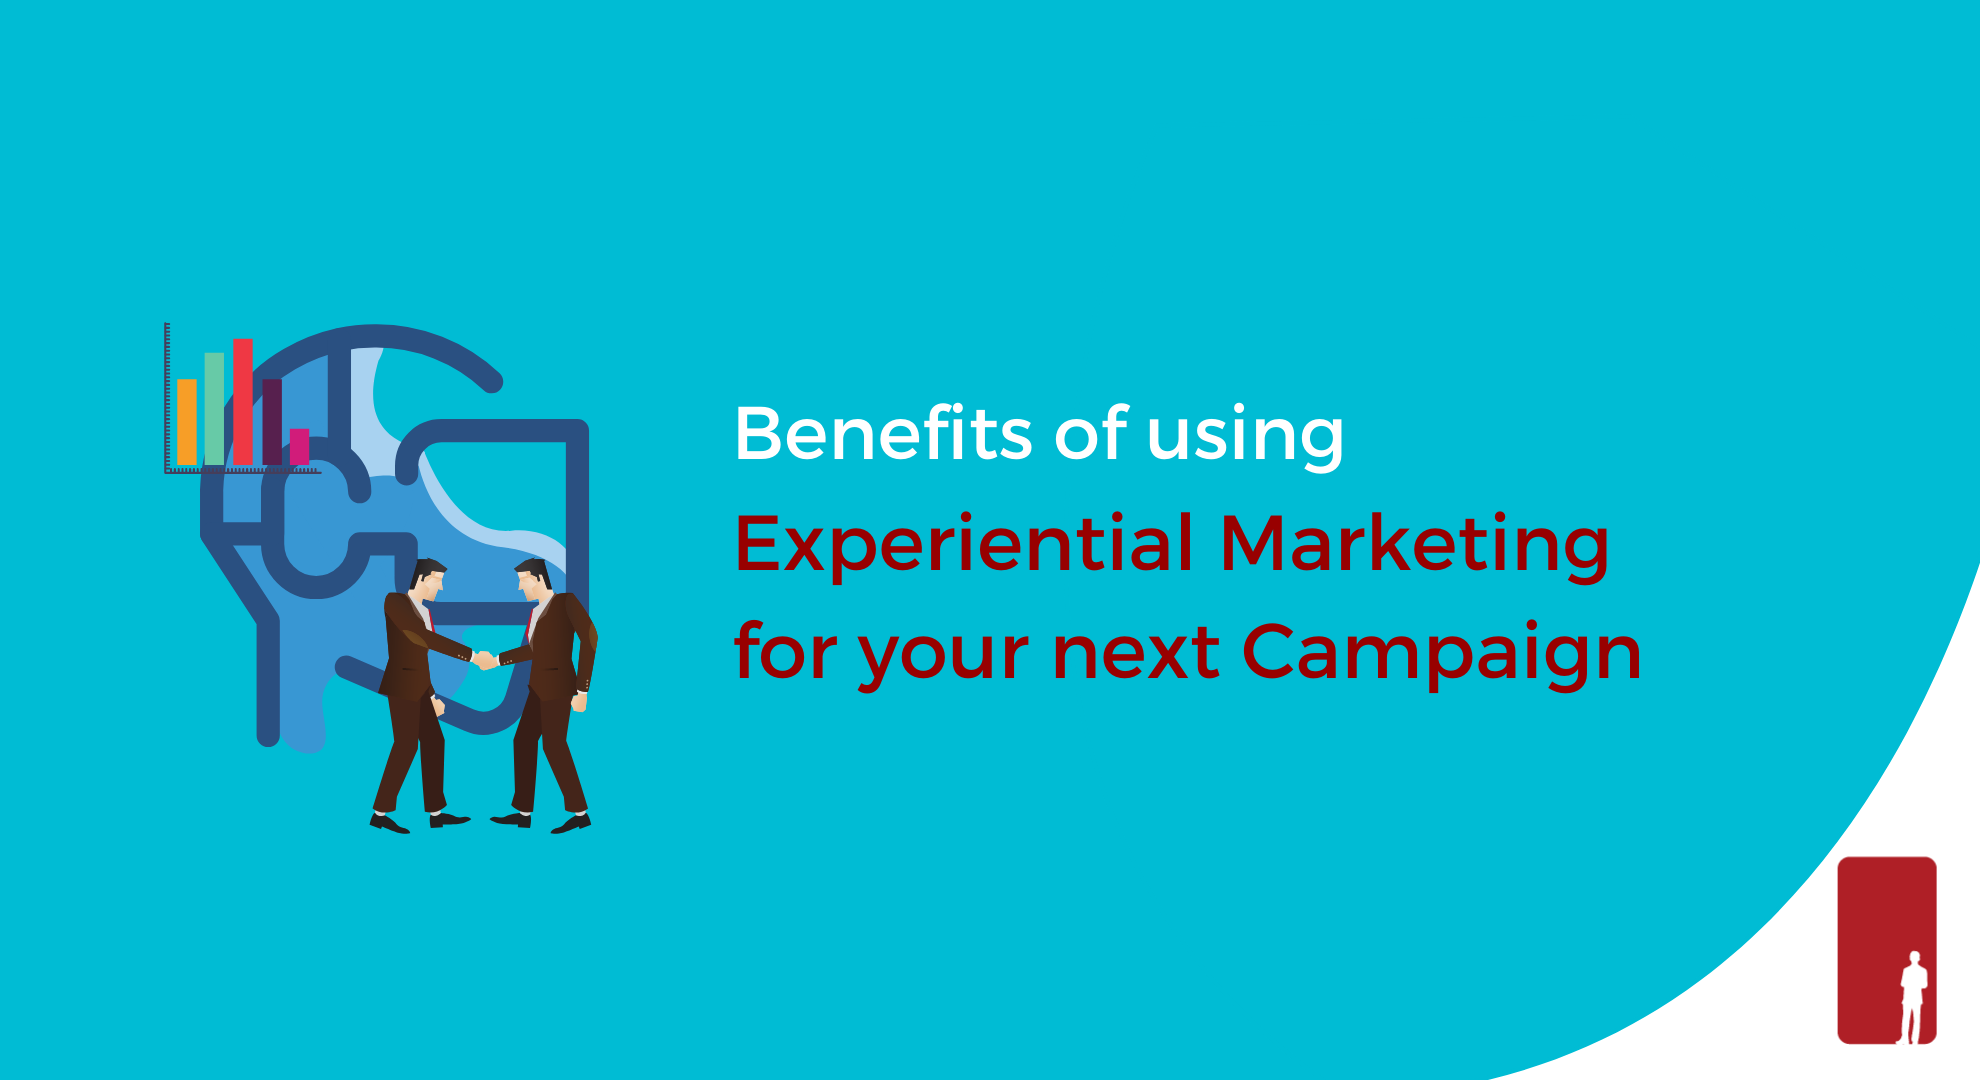 Benefits of using Experiential Marketing for your next campaign